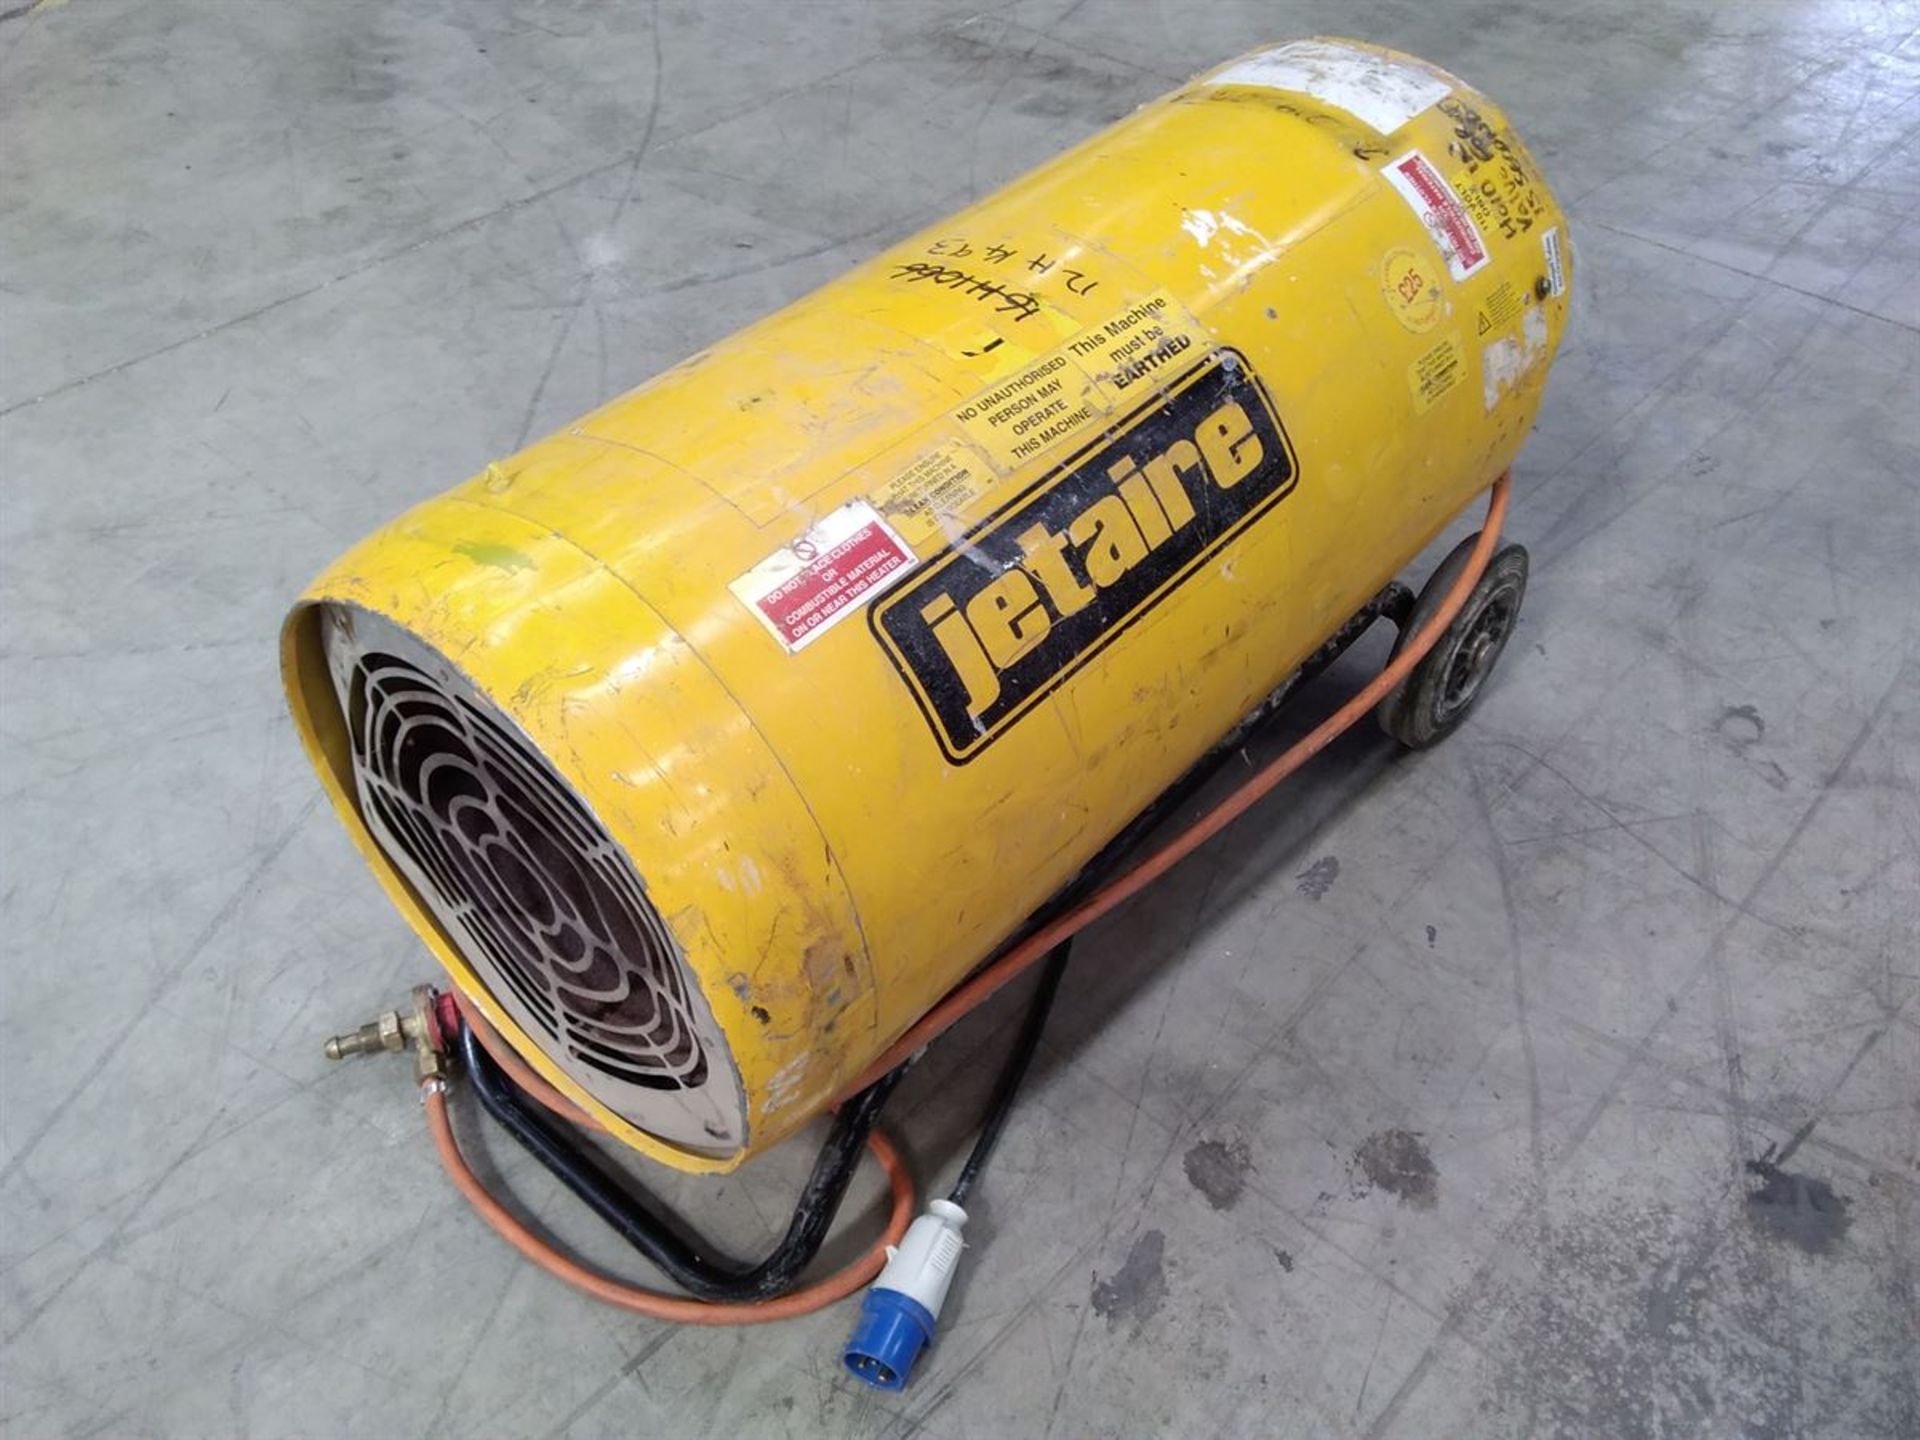 JETAIRE PROPANE SPACE HEATER 240V [039438] - Image 2 of 2